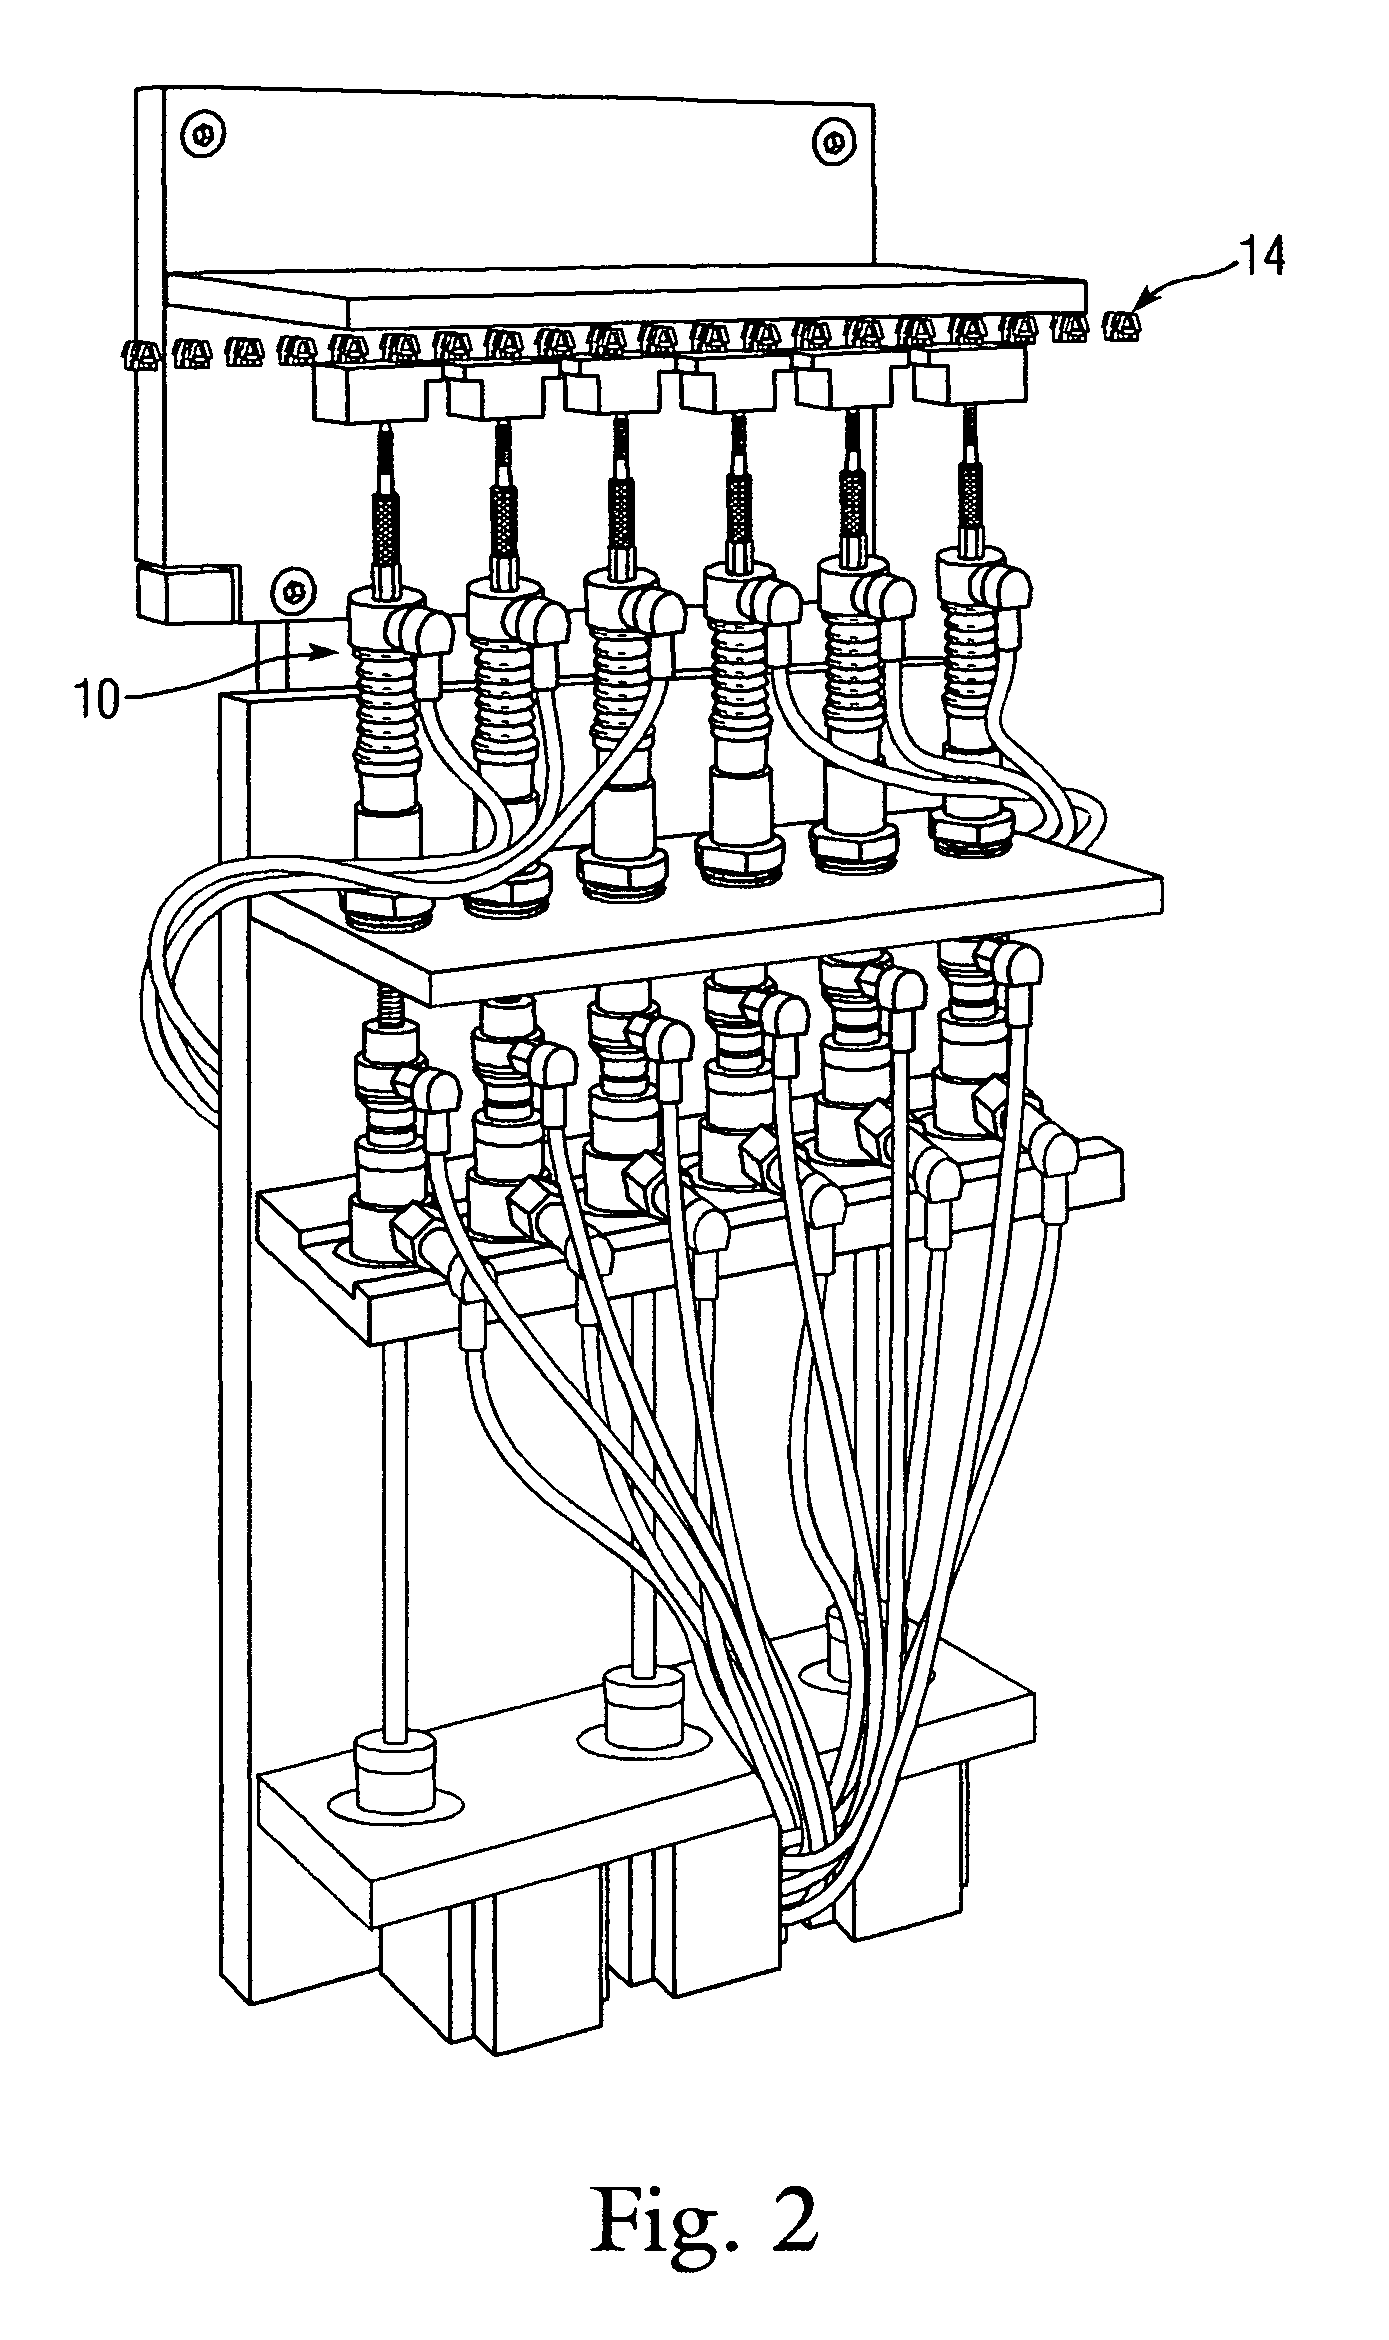 High output device for confirming thread presence in nuts and other threaded parts